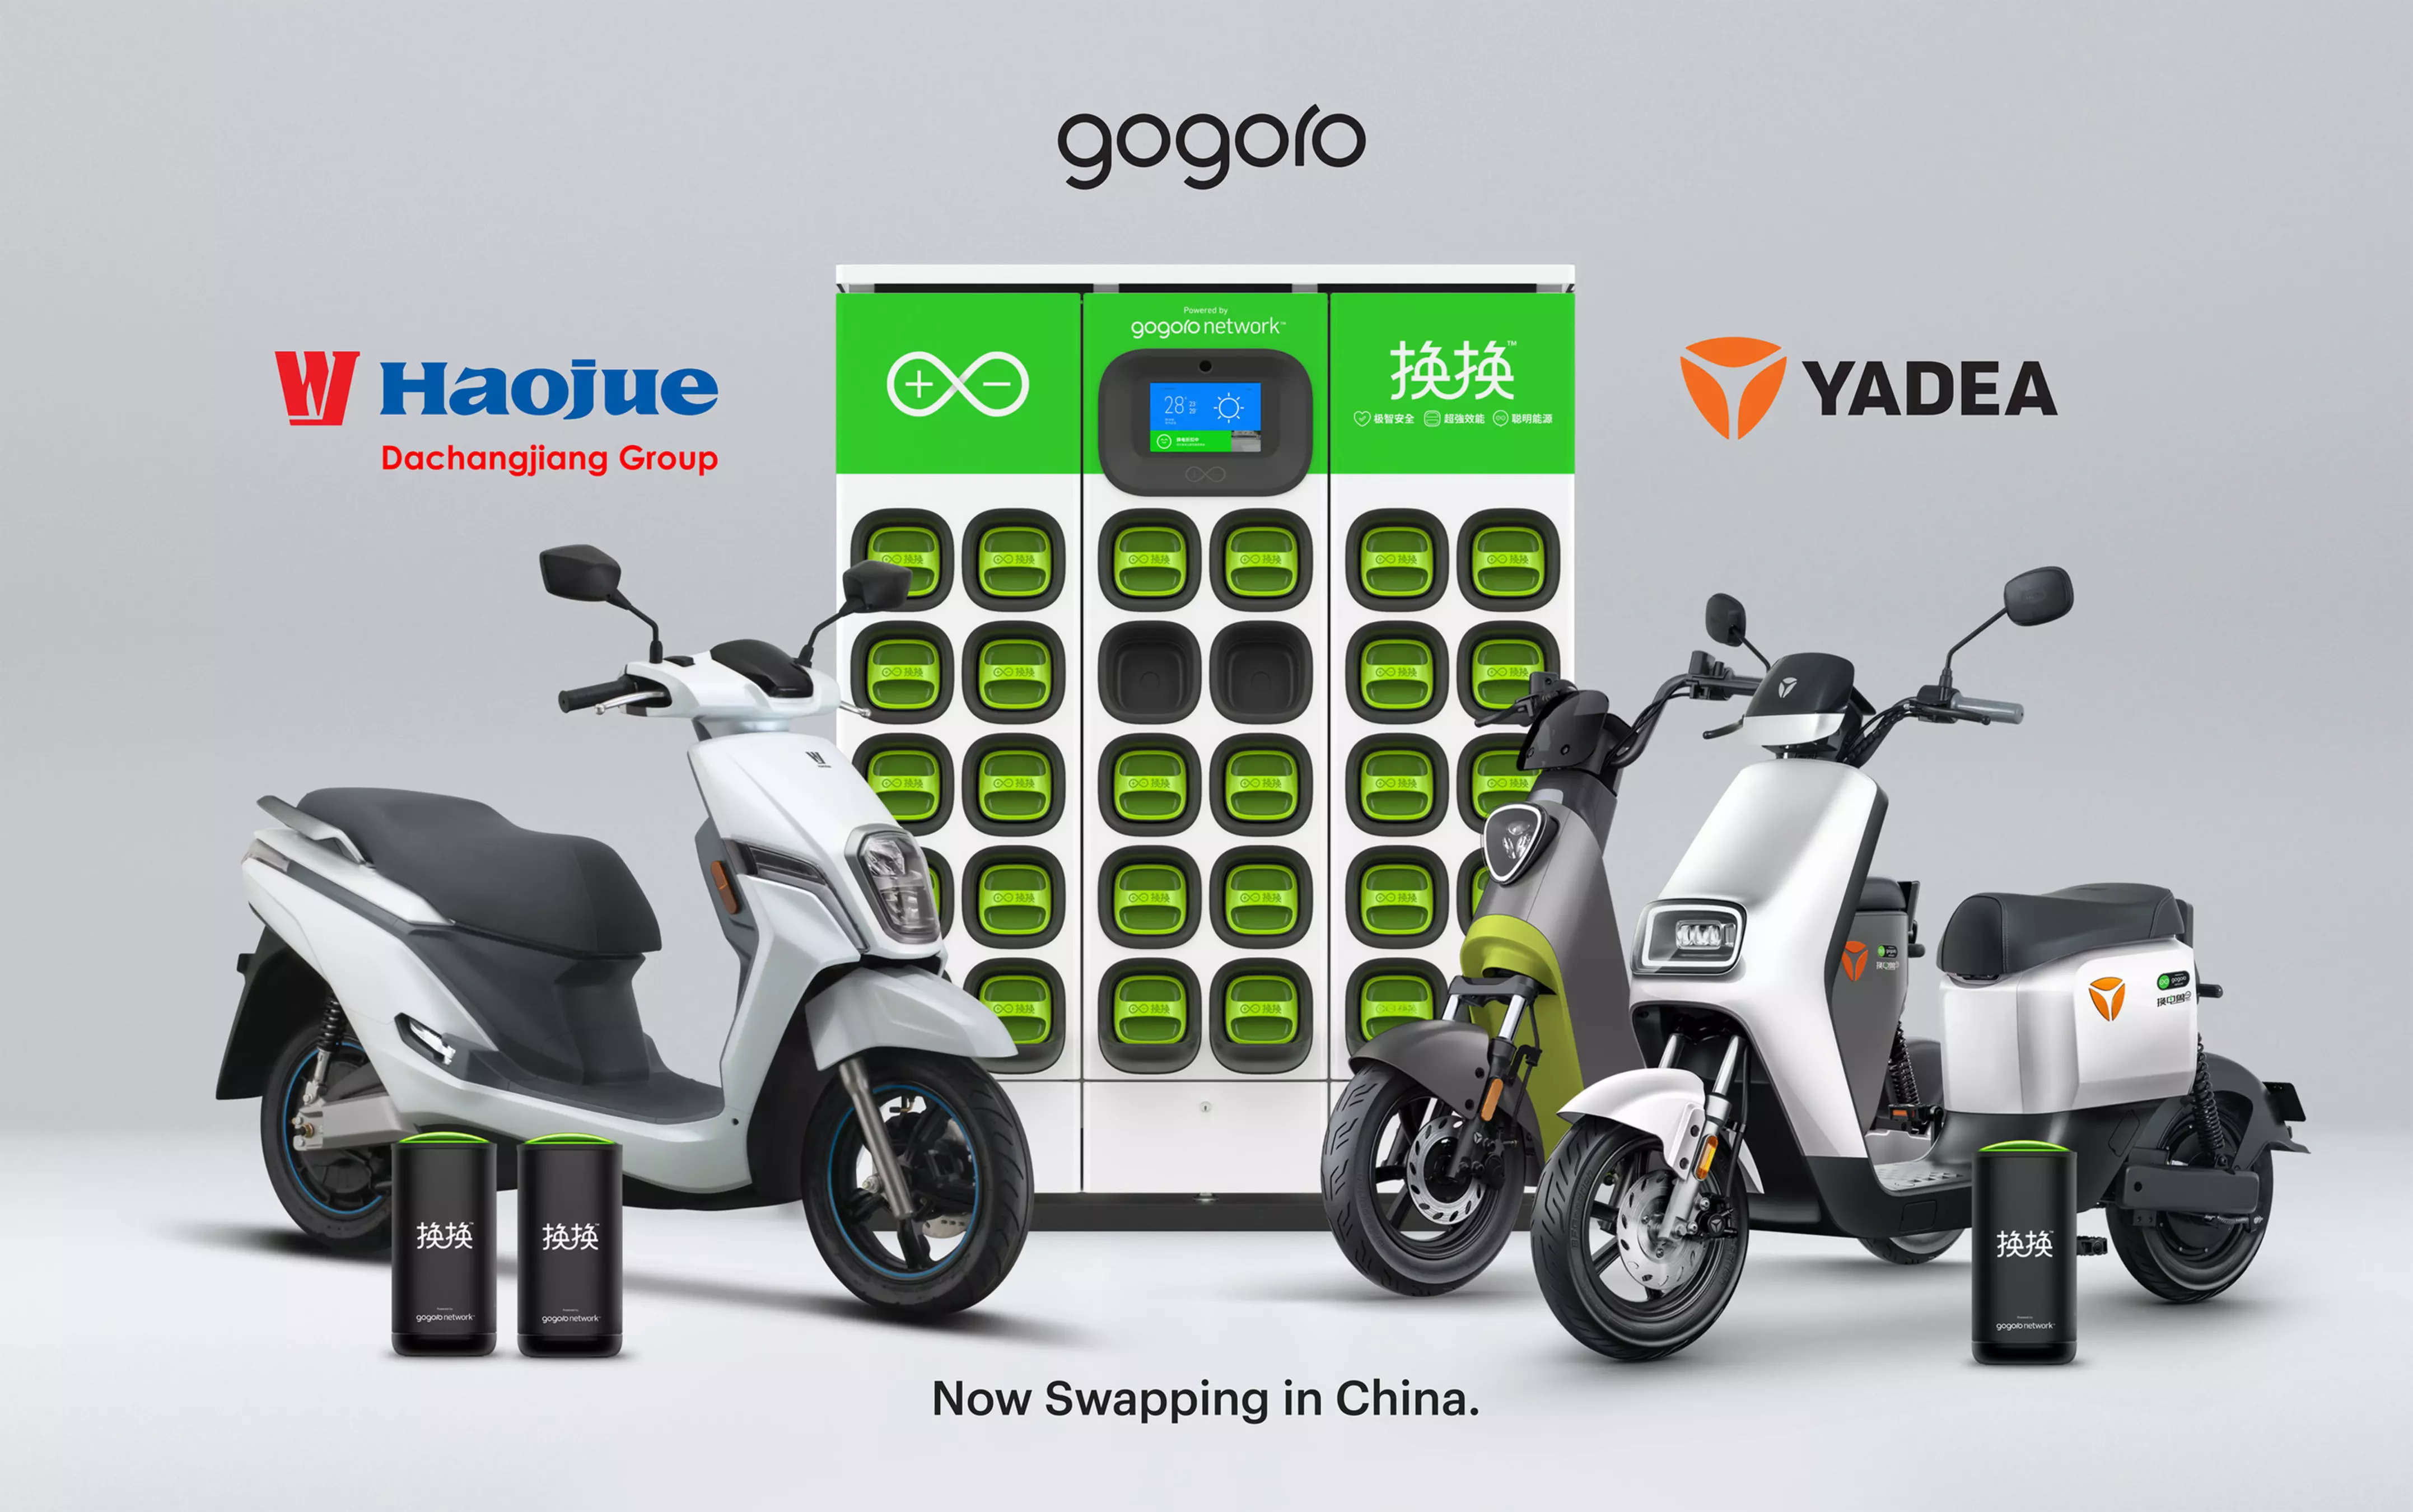 gogoro: Gogoro launches battery swapping in China with local 2W makers,  Auto News, ET Auto